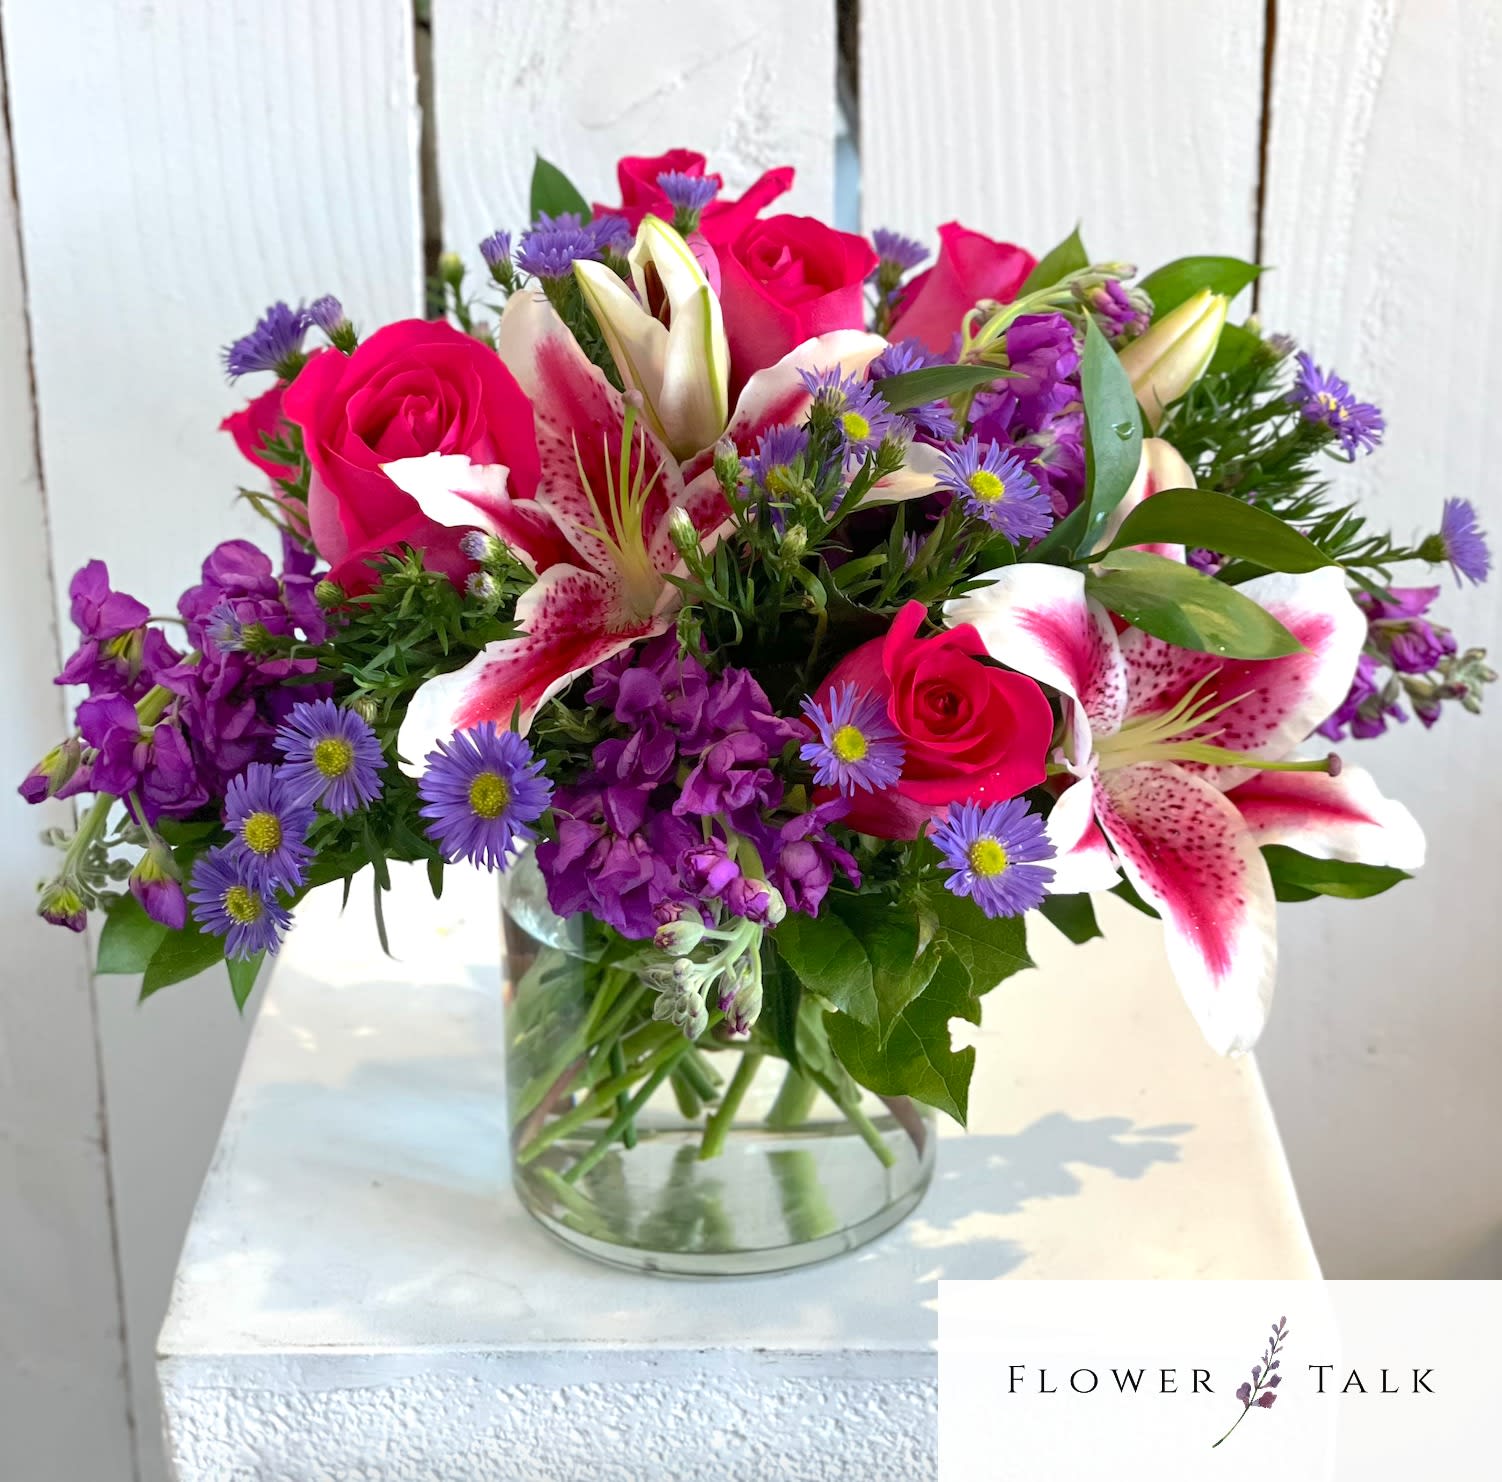 Stargaze Beauty - Stunning stargazer lilies with pink and purple blooms in a cylinder vase. 